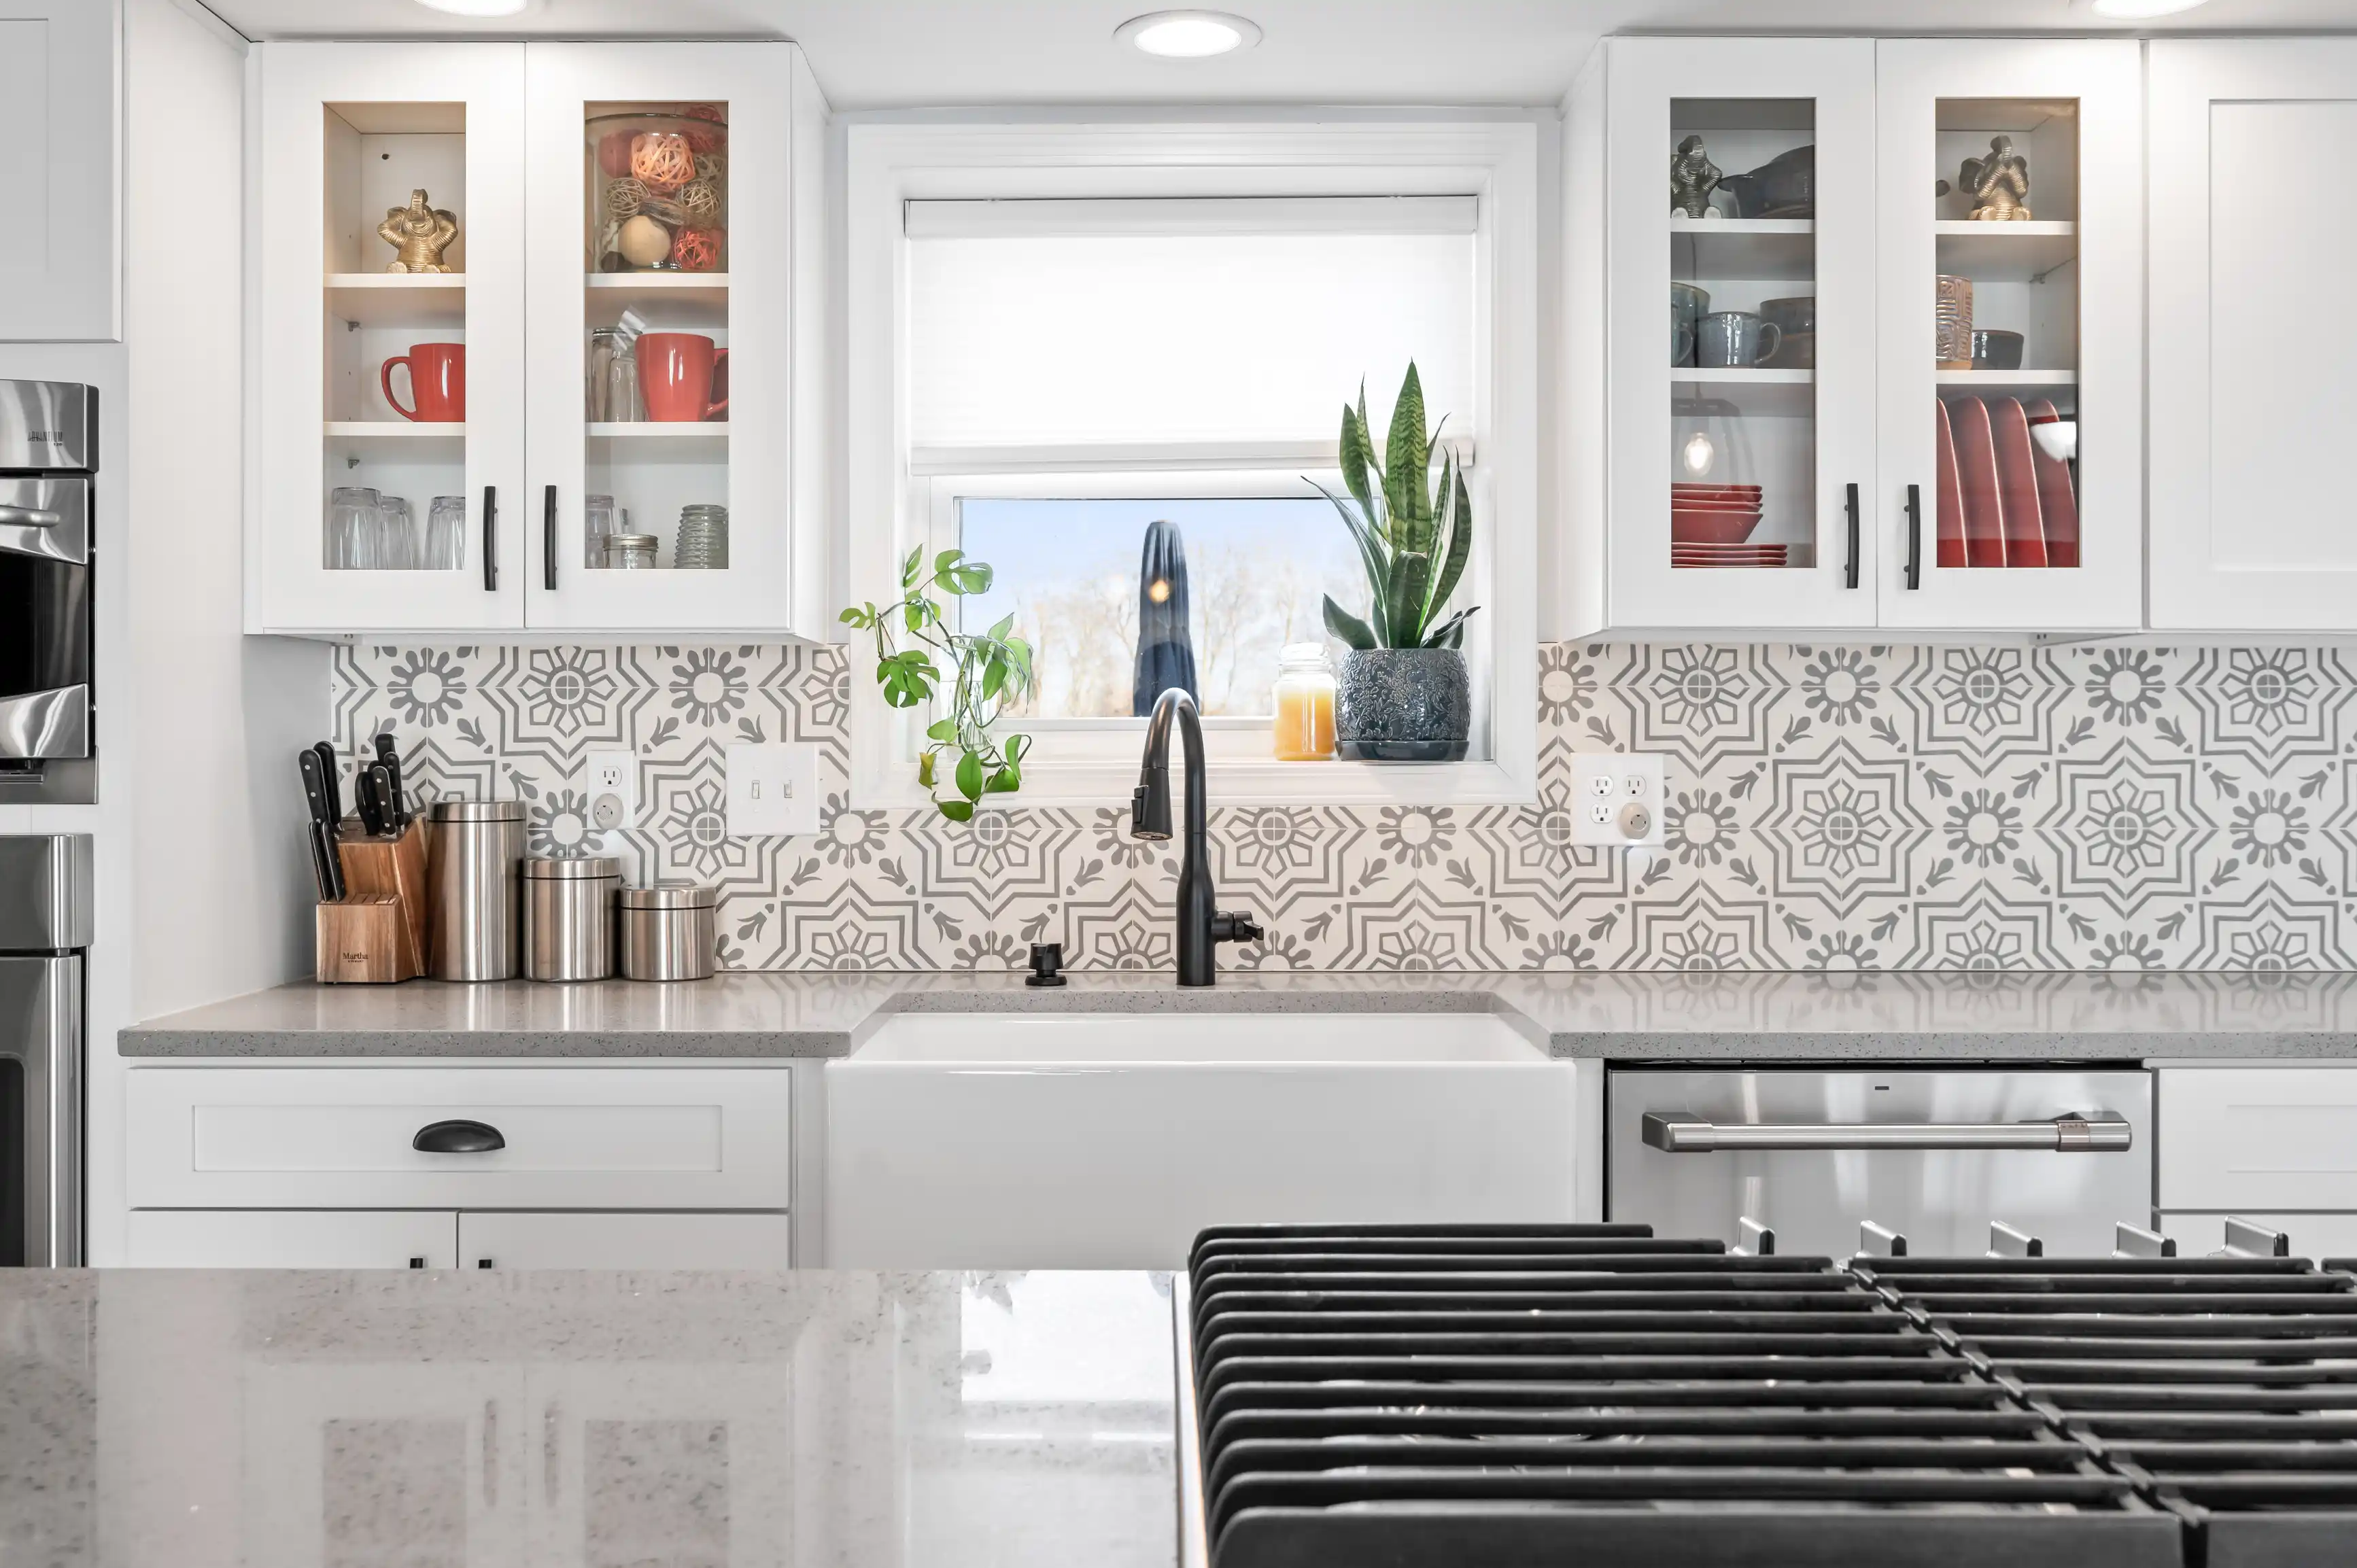 Modern kitchen interior with white cabinets, patterned backsplash, farmhouse sink, and stainless steel appliances.